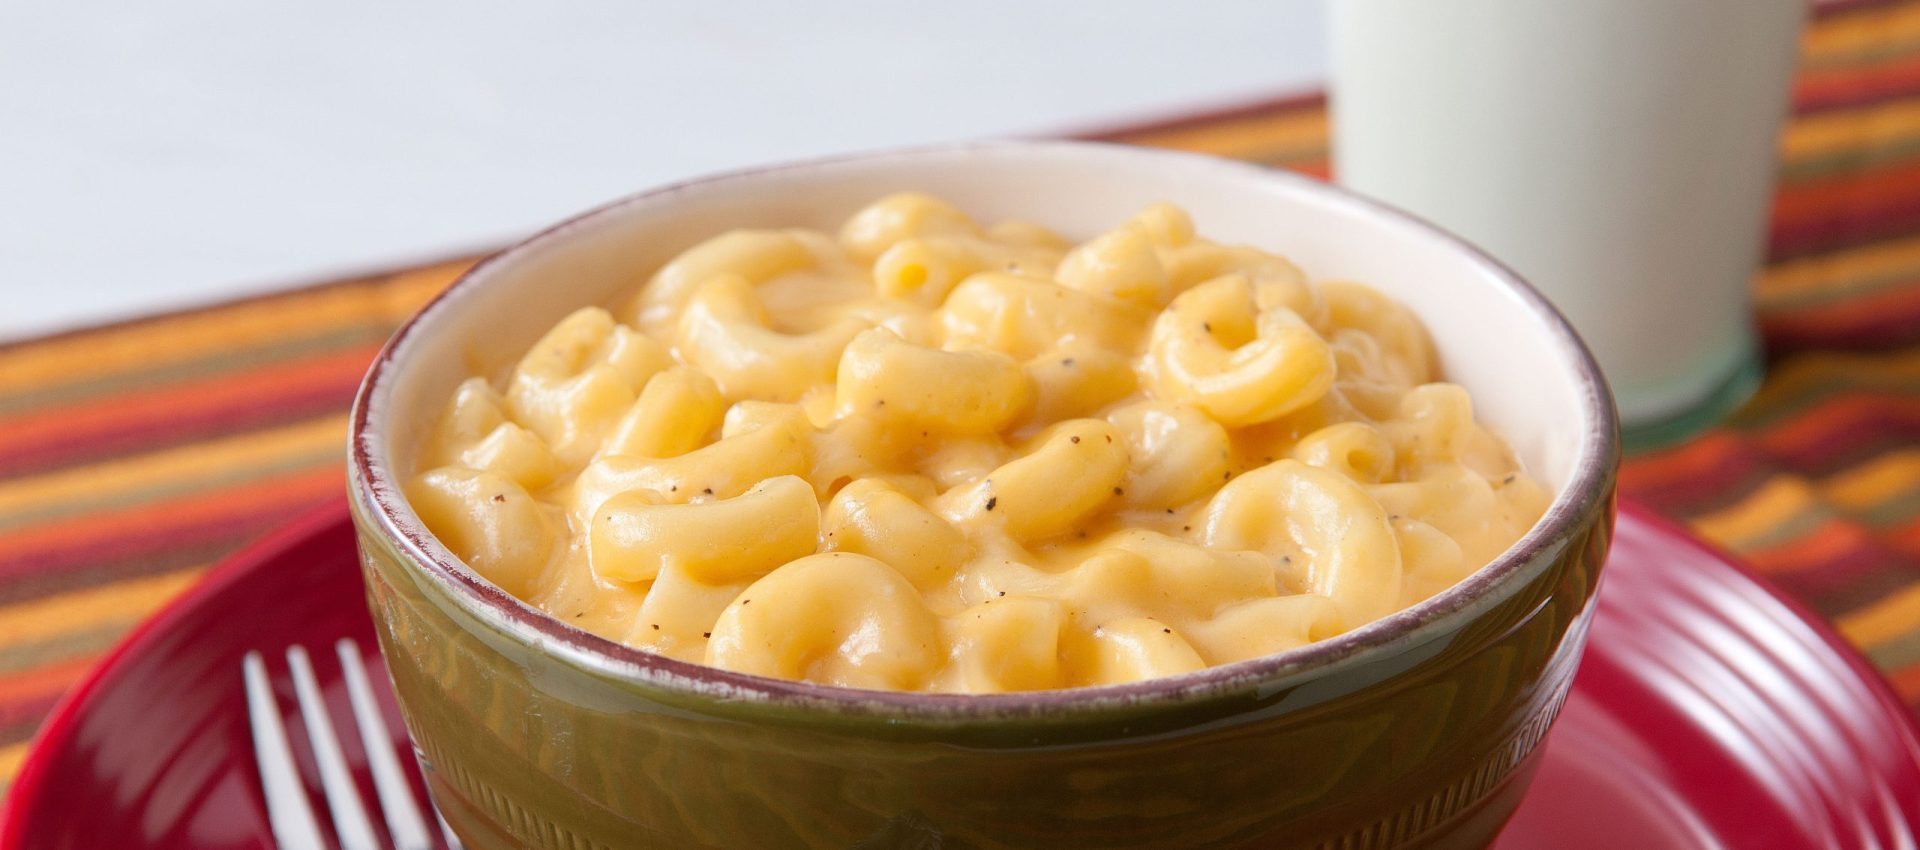 Mac-and-Cheese-HR-for-Web-scaled-1920x850 Old Fashioned Baked Macaroni and Cheese